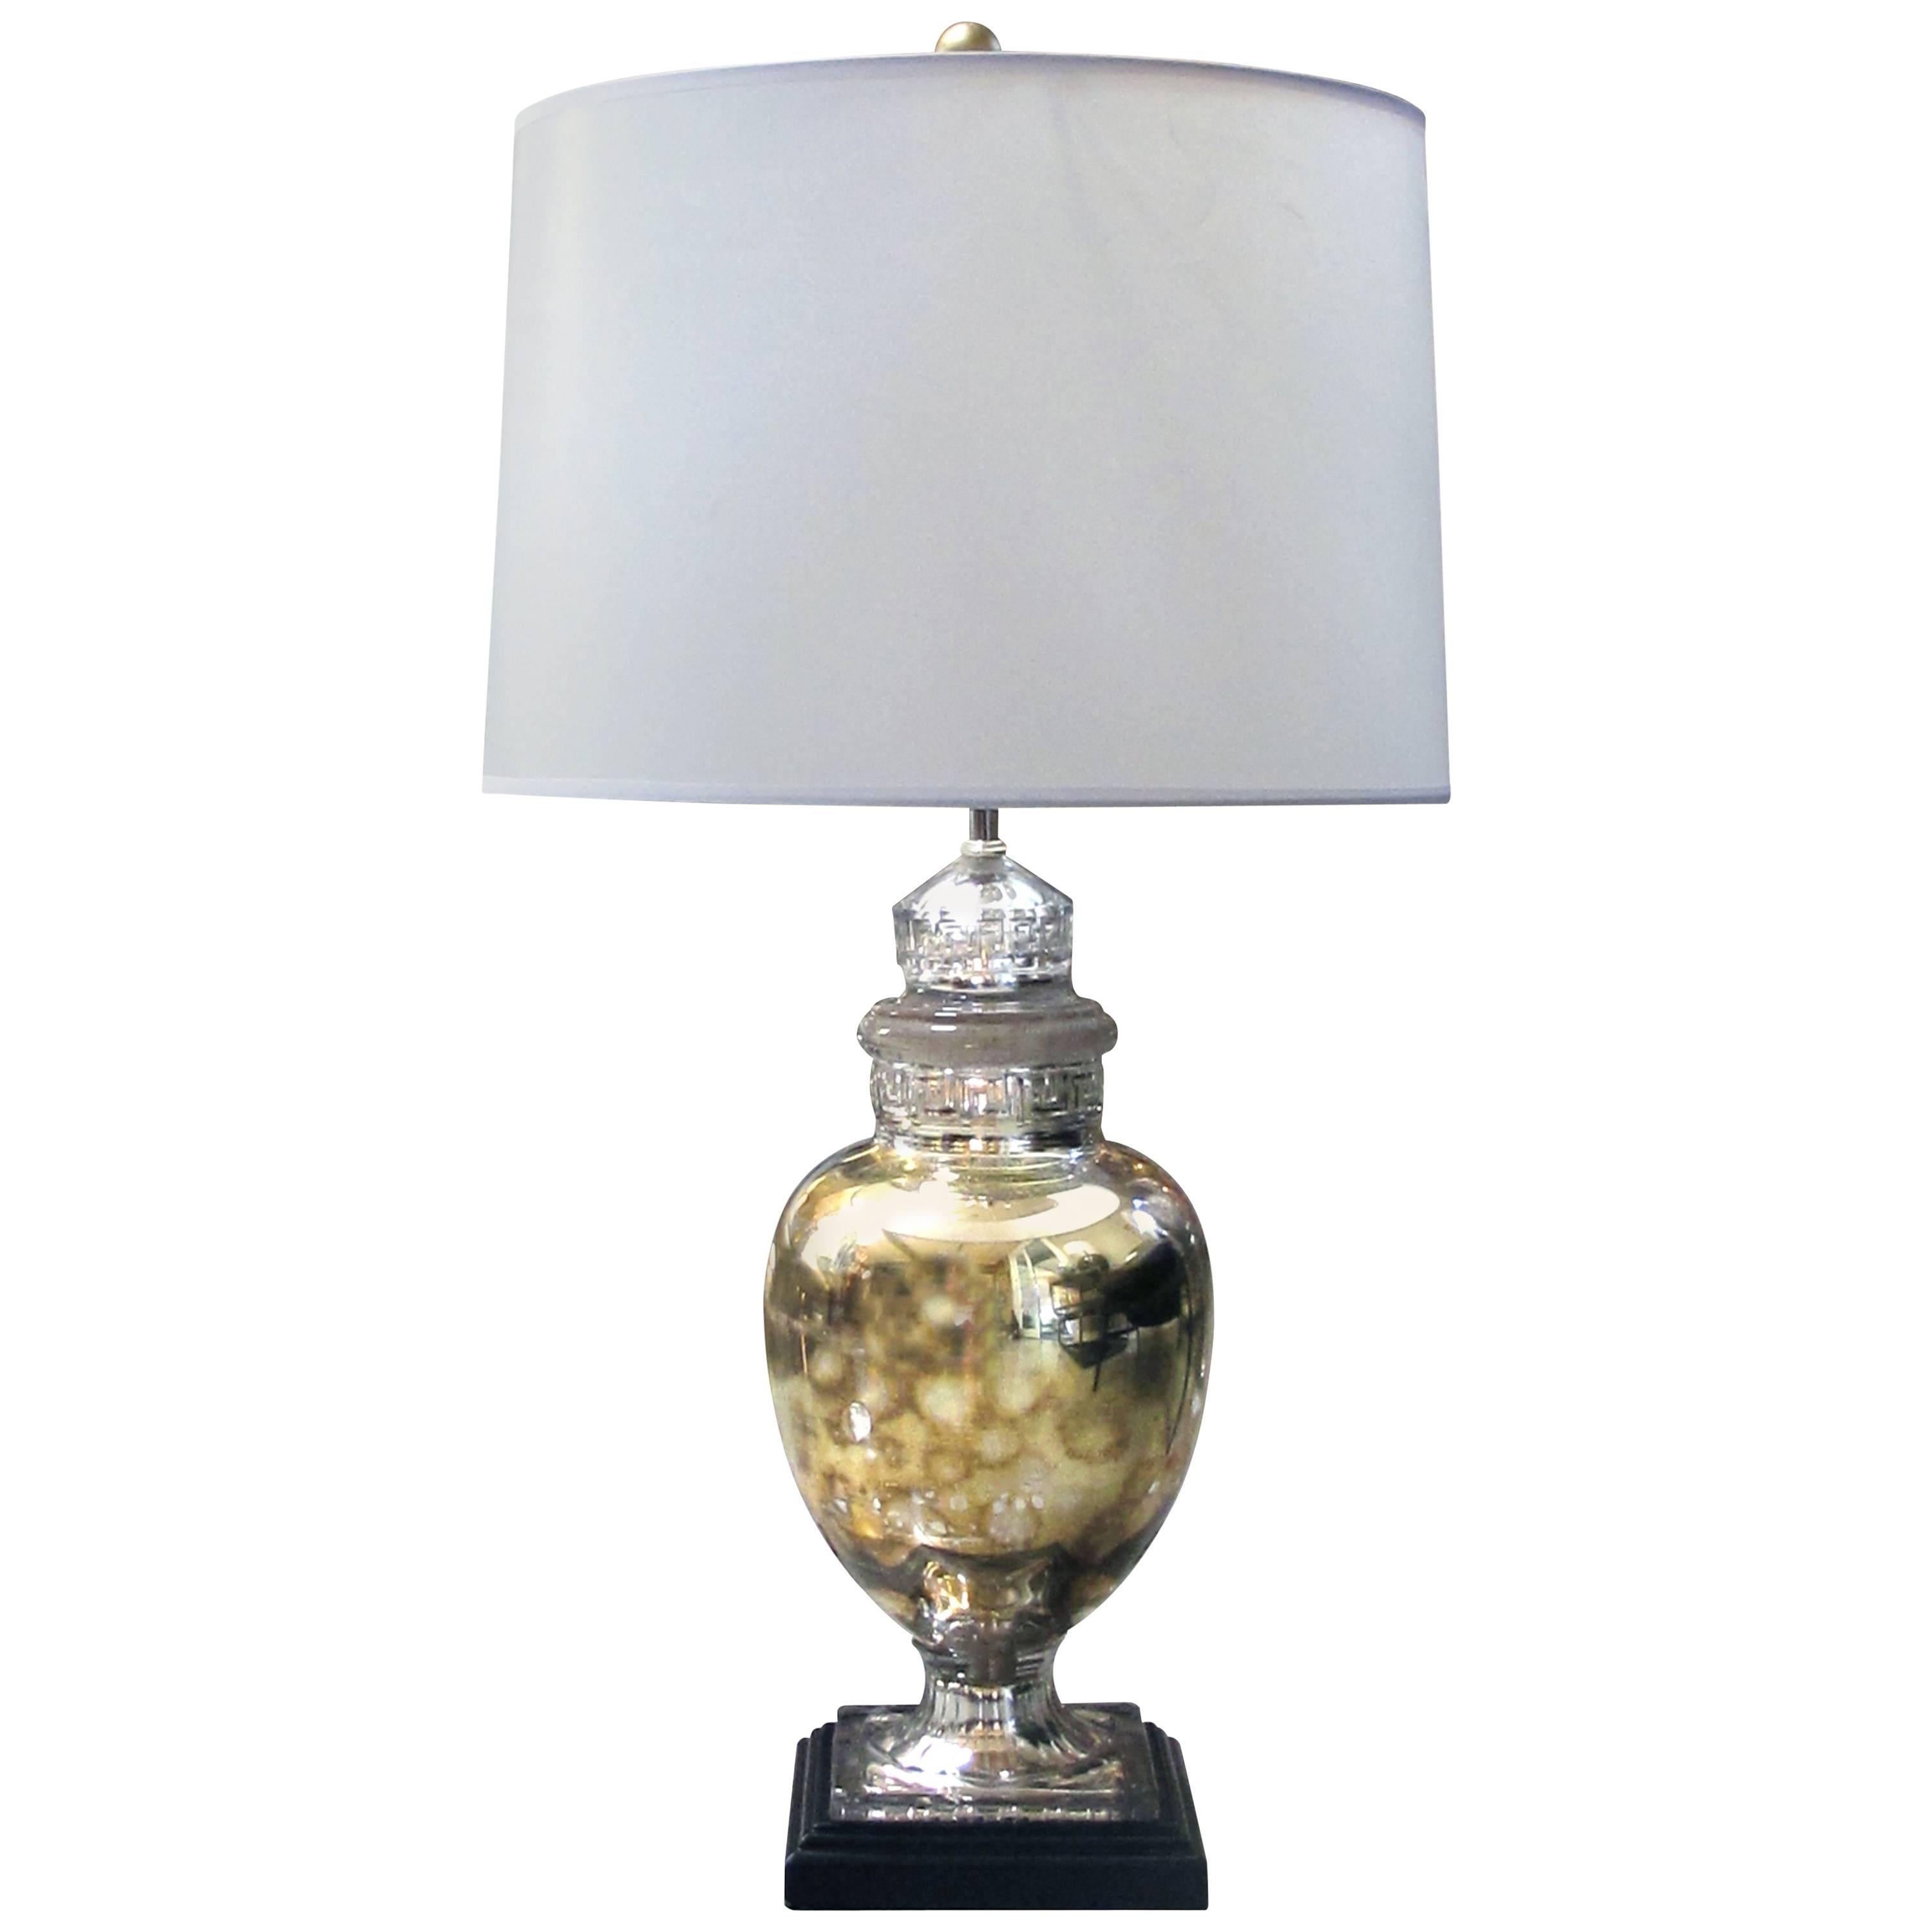 Shimmering American 1940s Mercury-Mirror Apothecary Jar Now Mounted as a Lamp